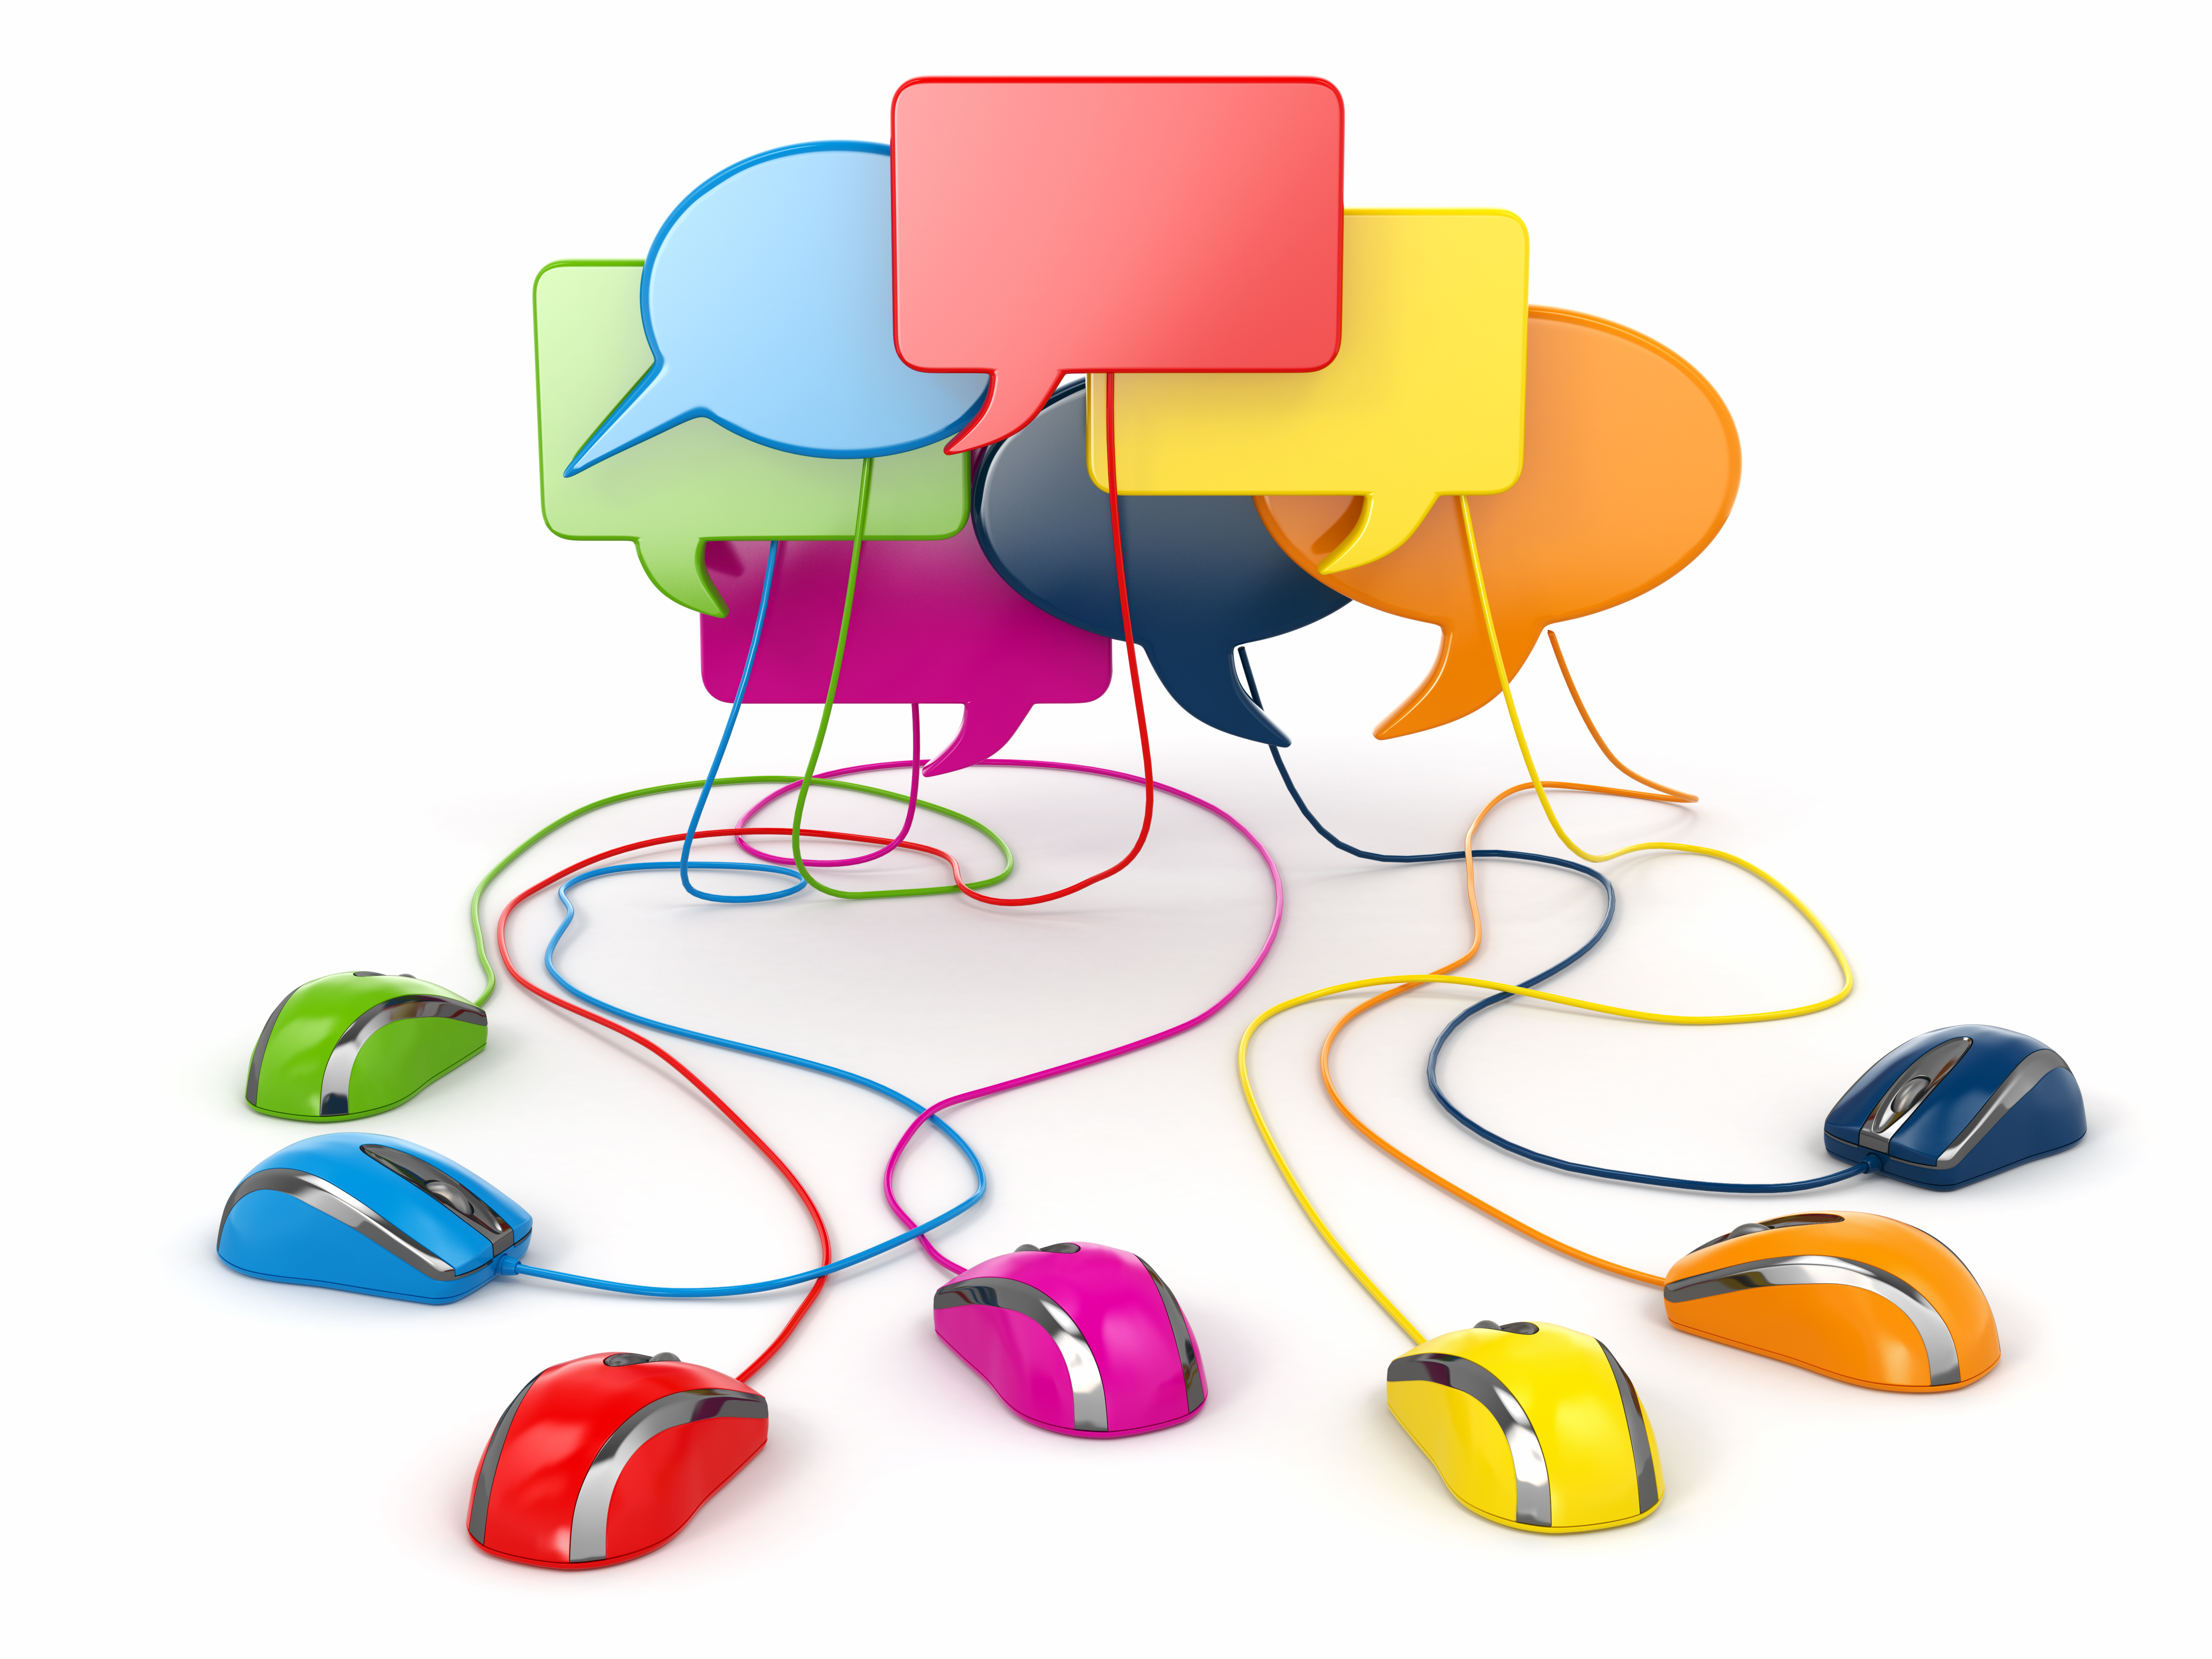 Social network concept with multiple computer mouses connected to chat bubbles